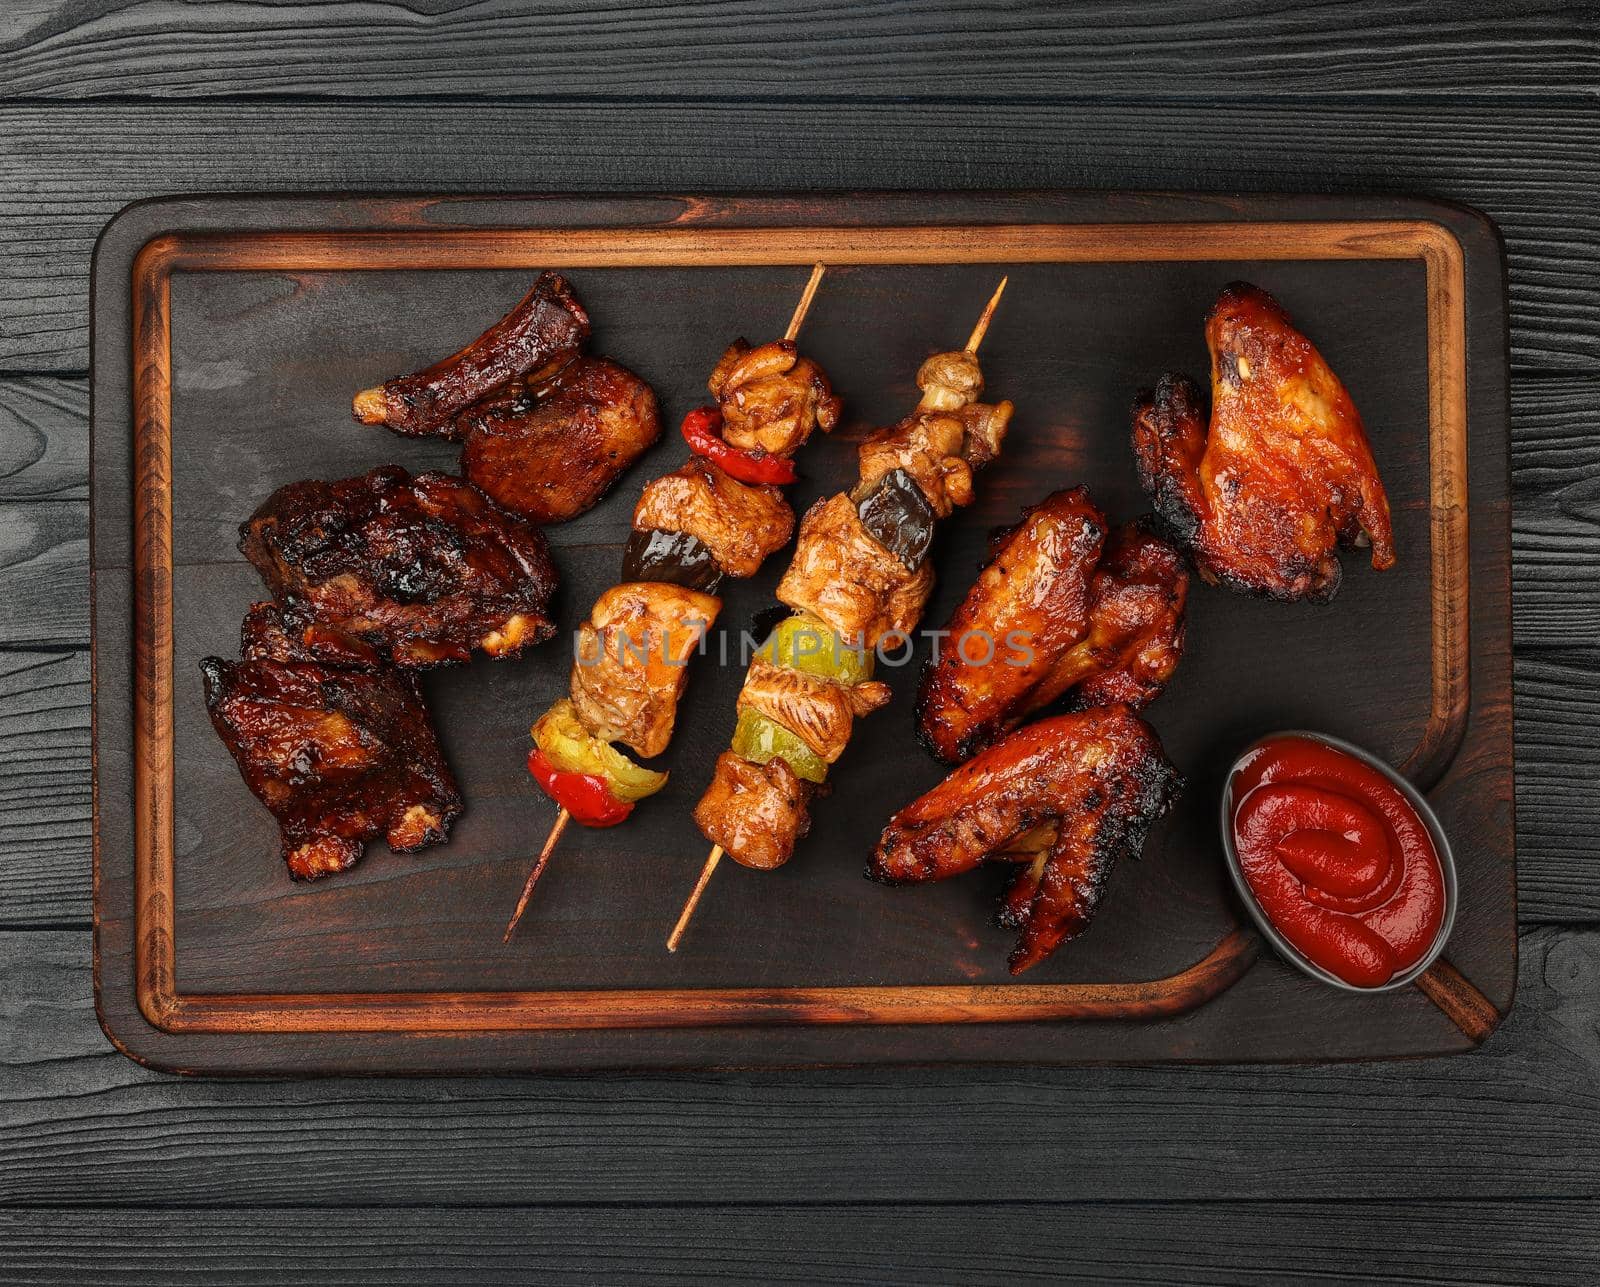 Mixed barbecue of chicken wings and beef ribs by BreakingTheWalls